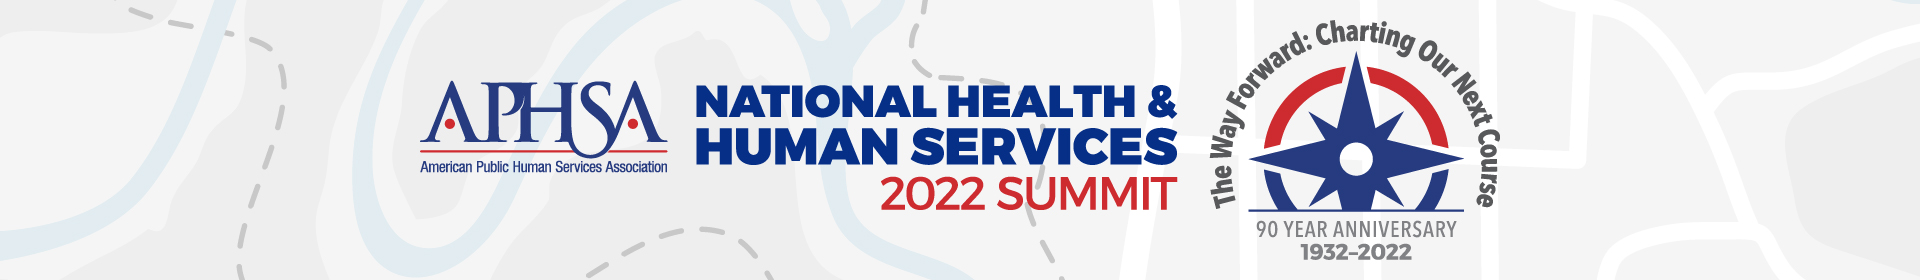 APHSA National Health & Human Services Summit Event Banner